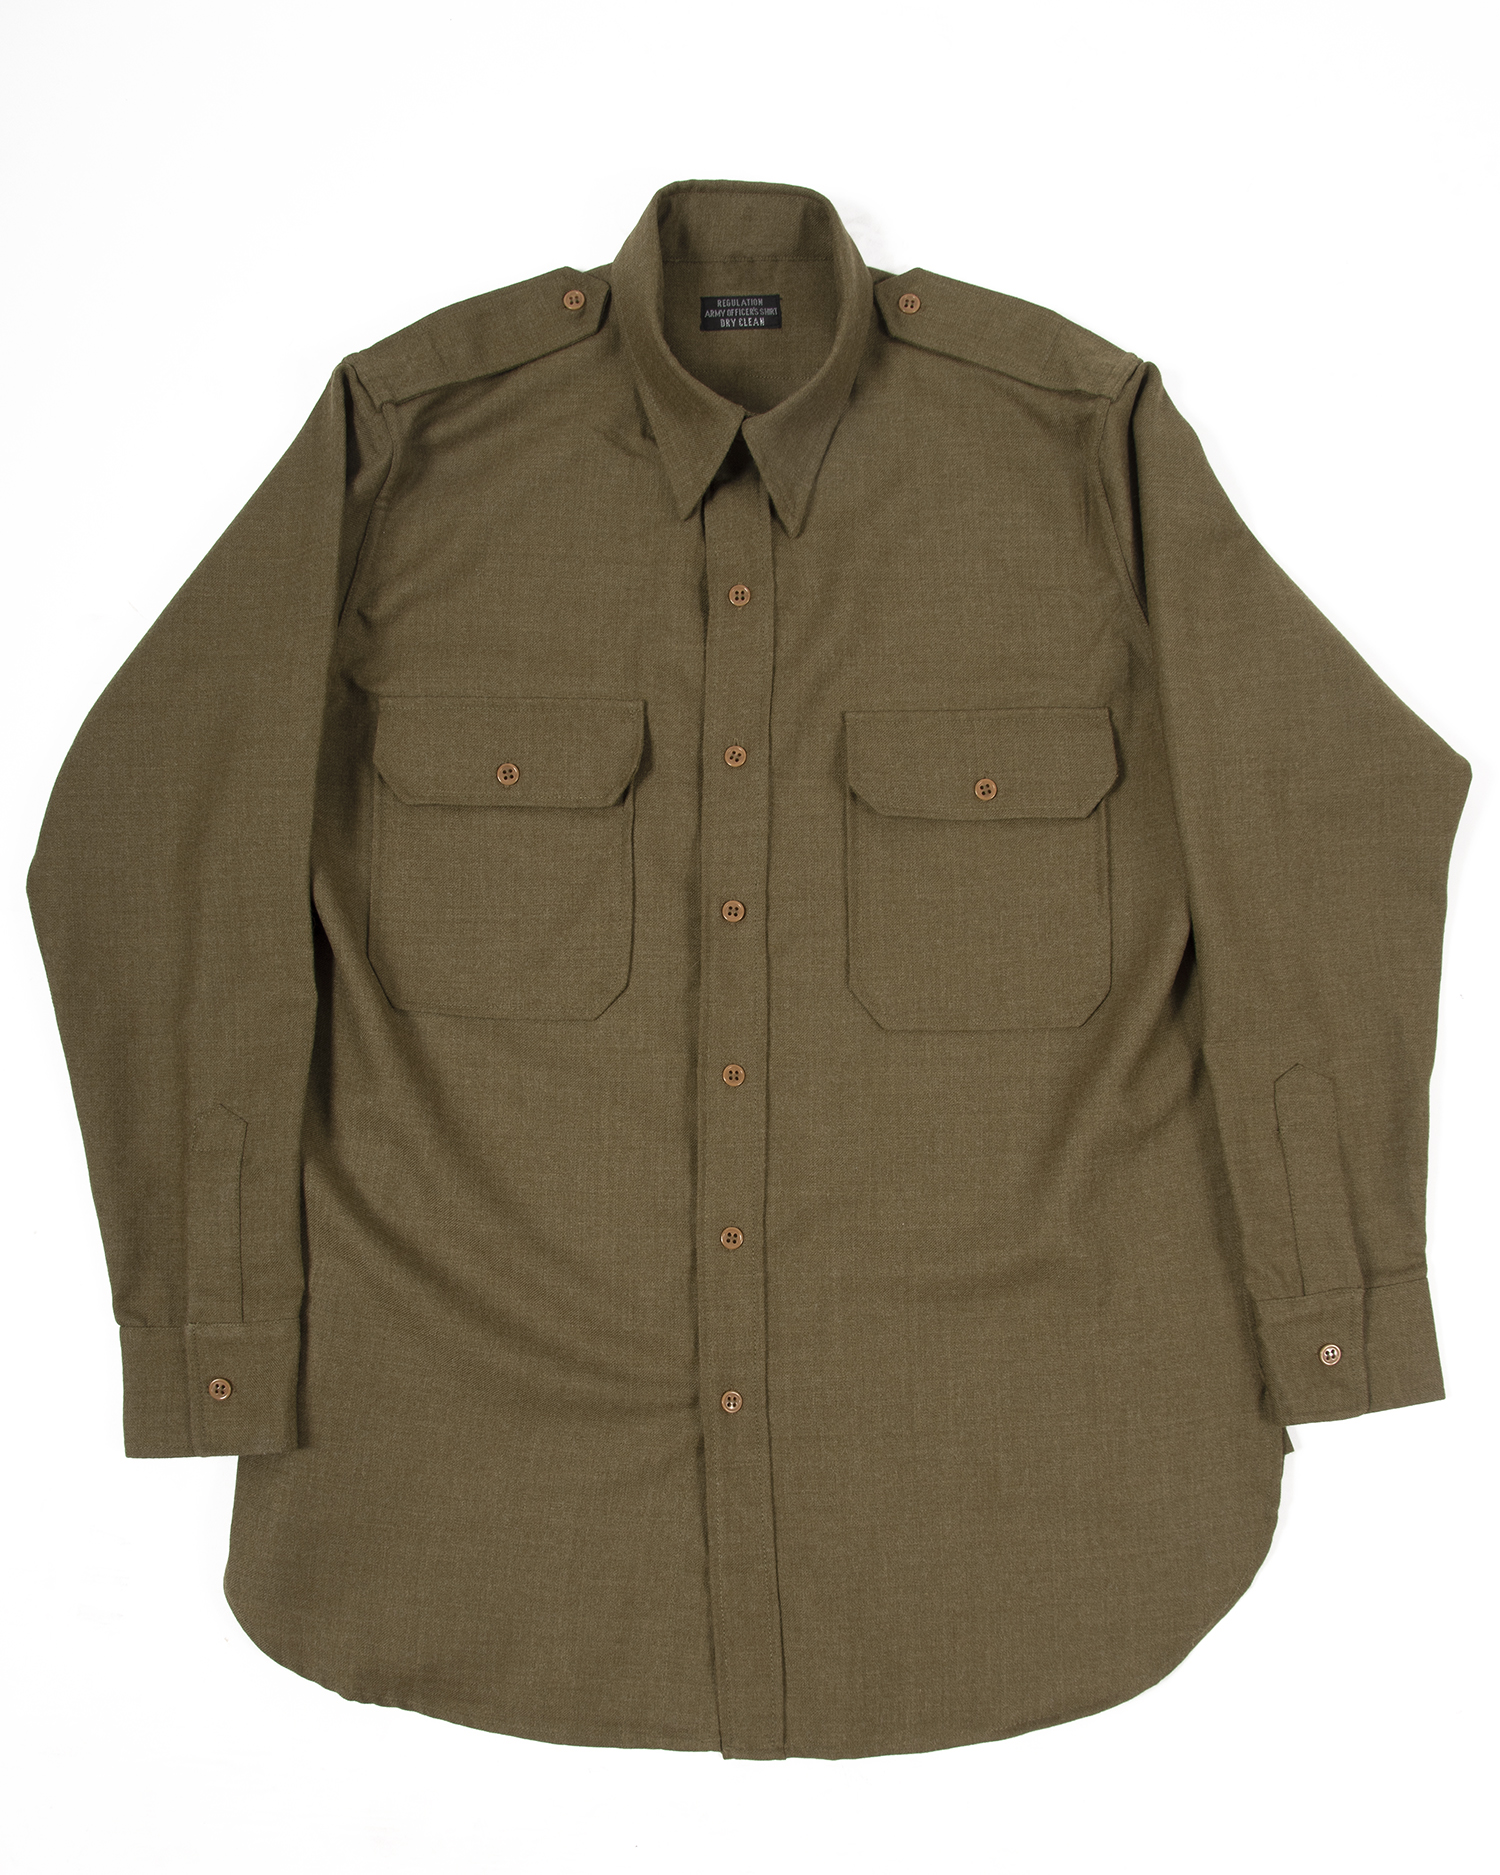 WWII US Army Officer Wool Shirt